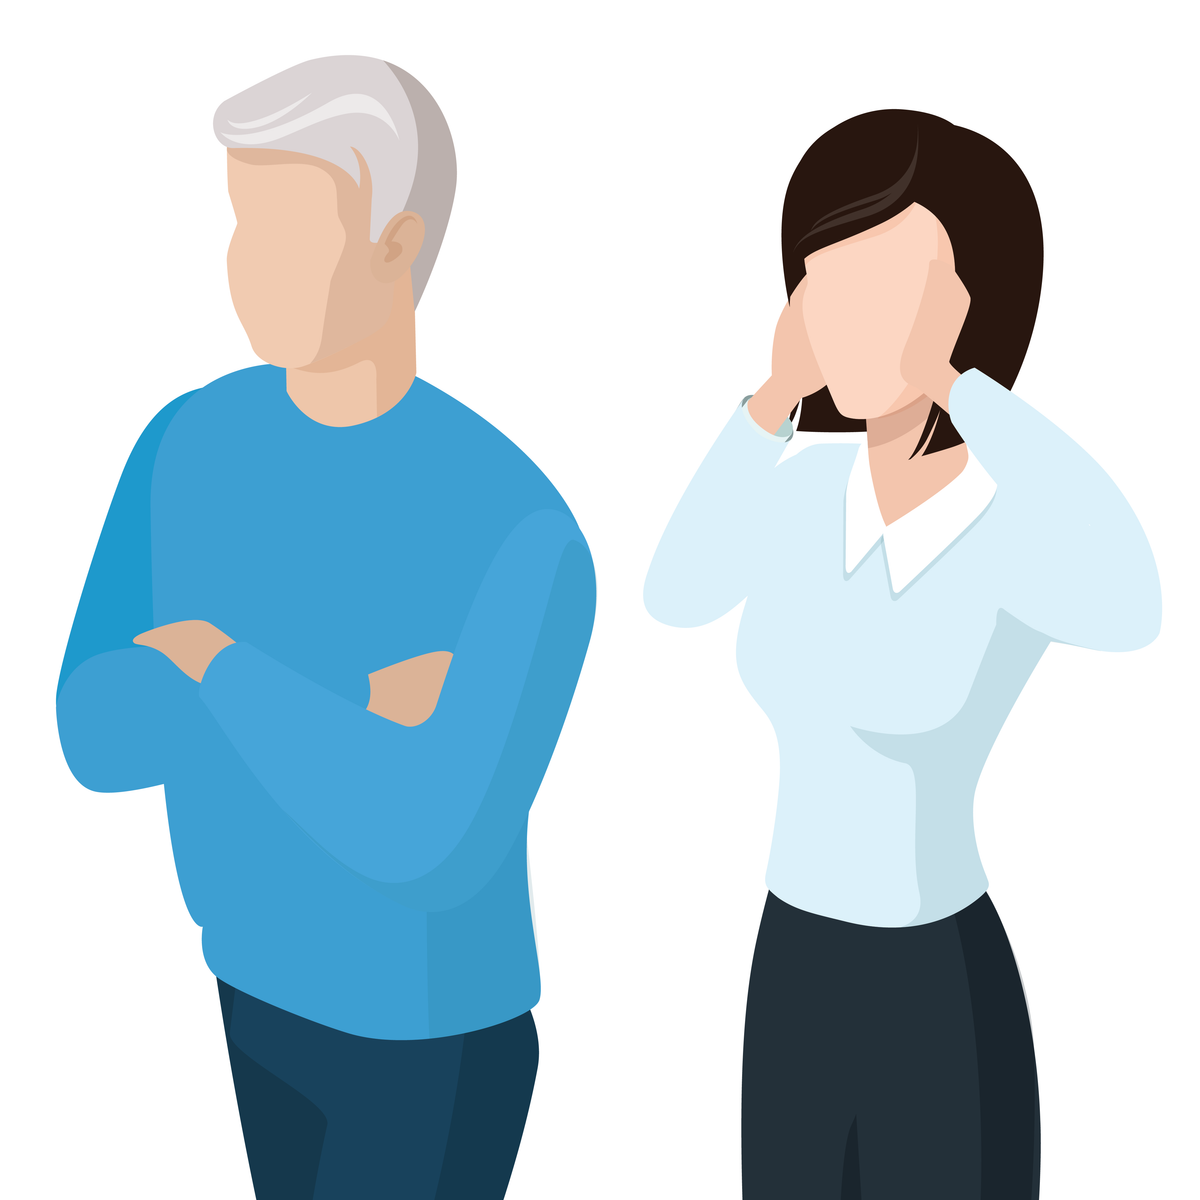 Aging in place mistake: Not listening or being receptive